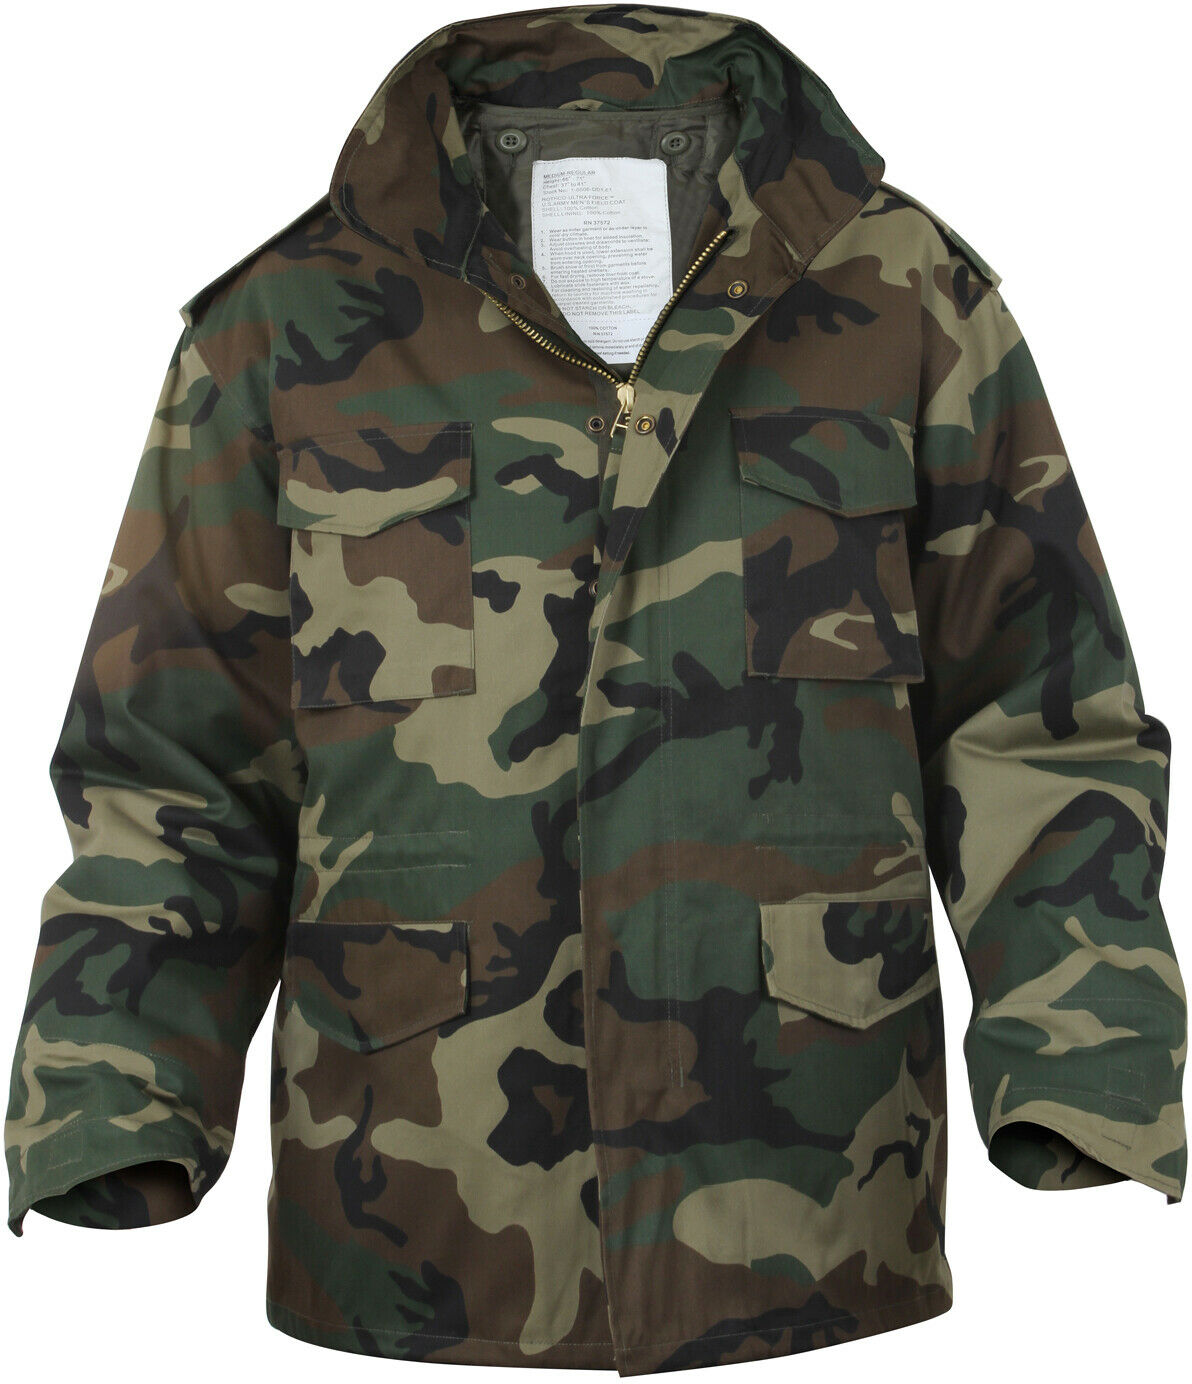 Woodland Camouflage M65 Coat Military M-65 Field Jacket with Liner Army Camo